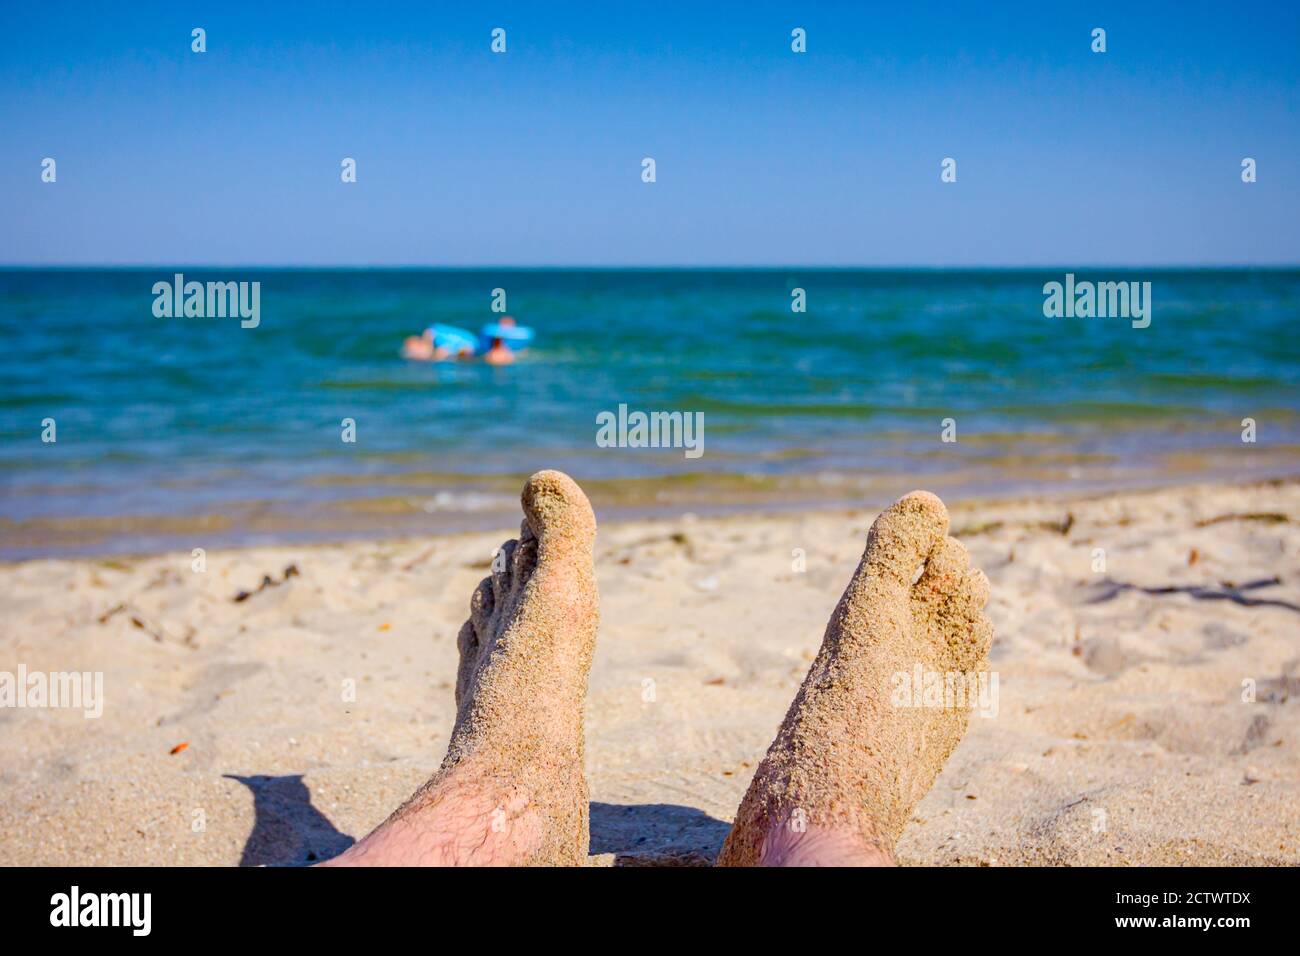 Man's legs are sunbathing by lying carefree on sand next to the coastline, on public beach. Stock Photo